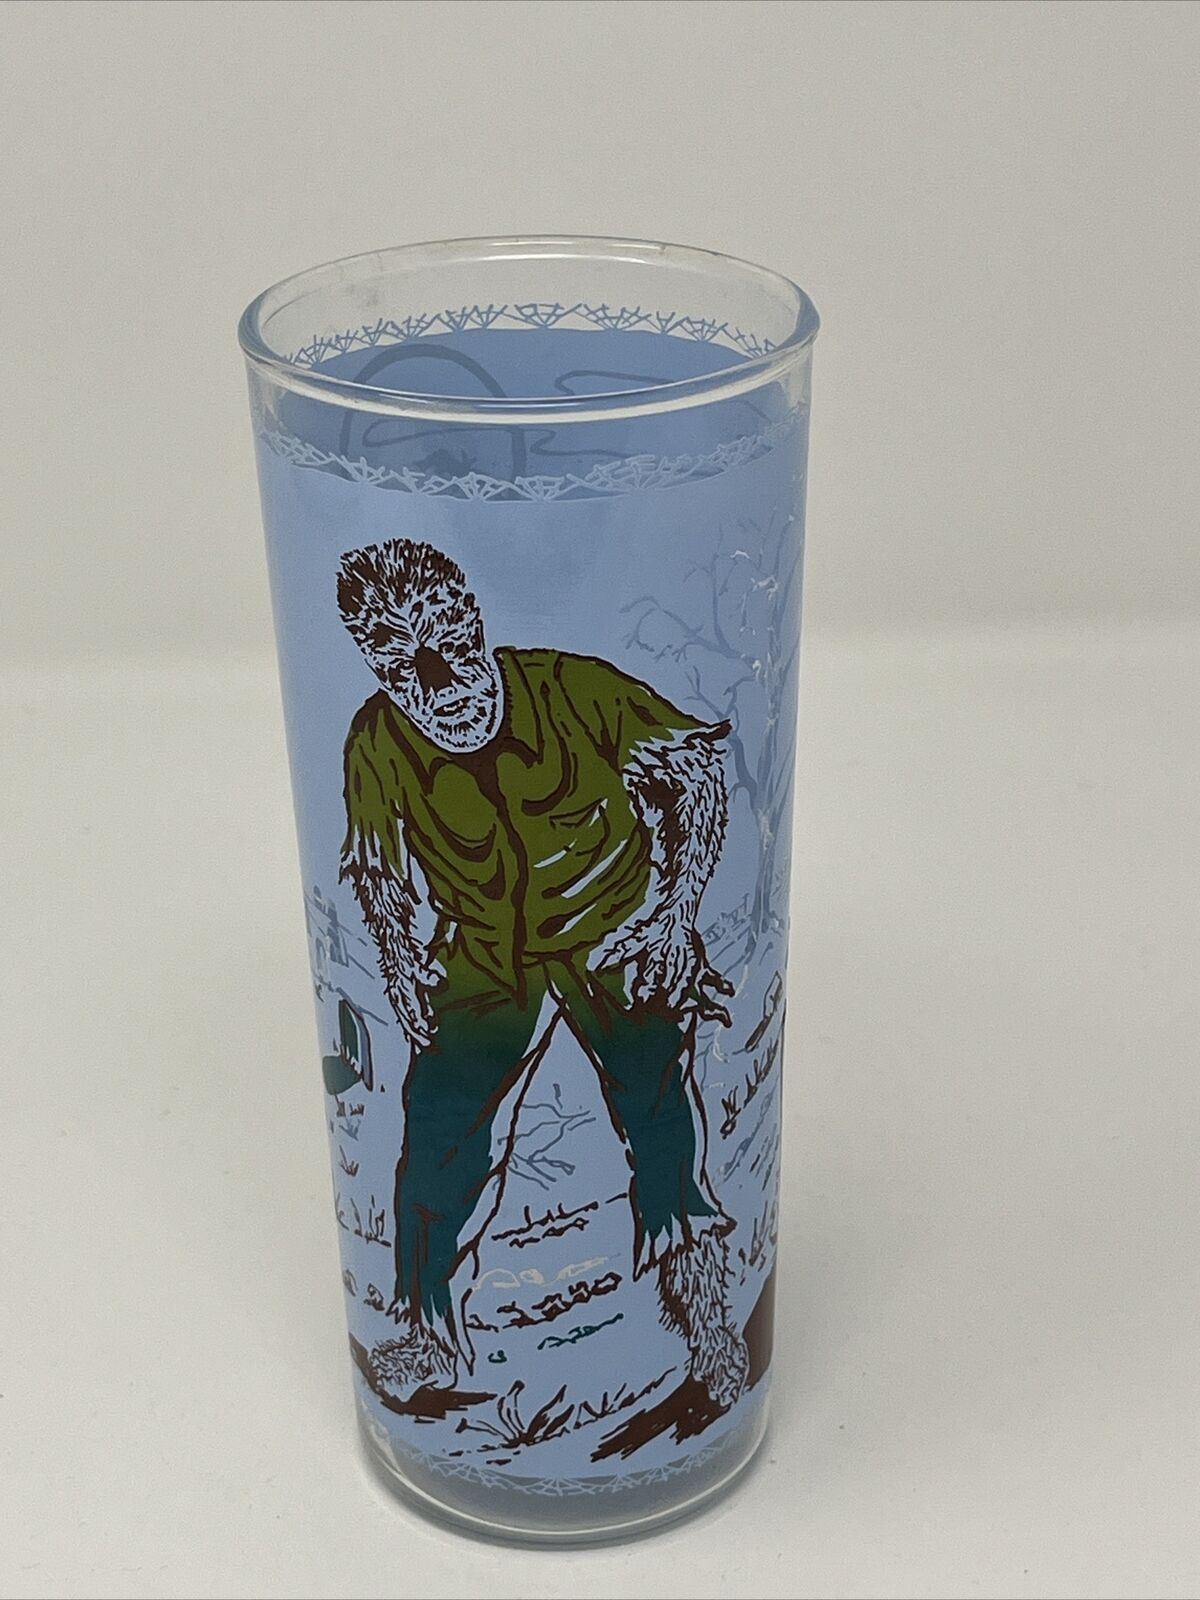 🔥🔥Vintage 1960’s WOLFMAN glass Universal Pictures Co.🔥🔥